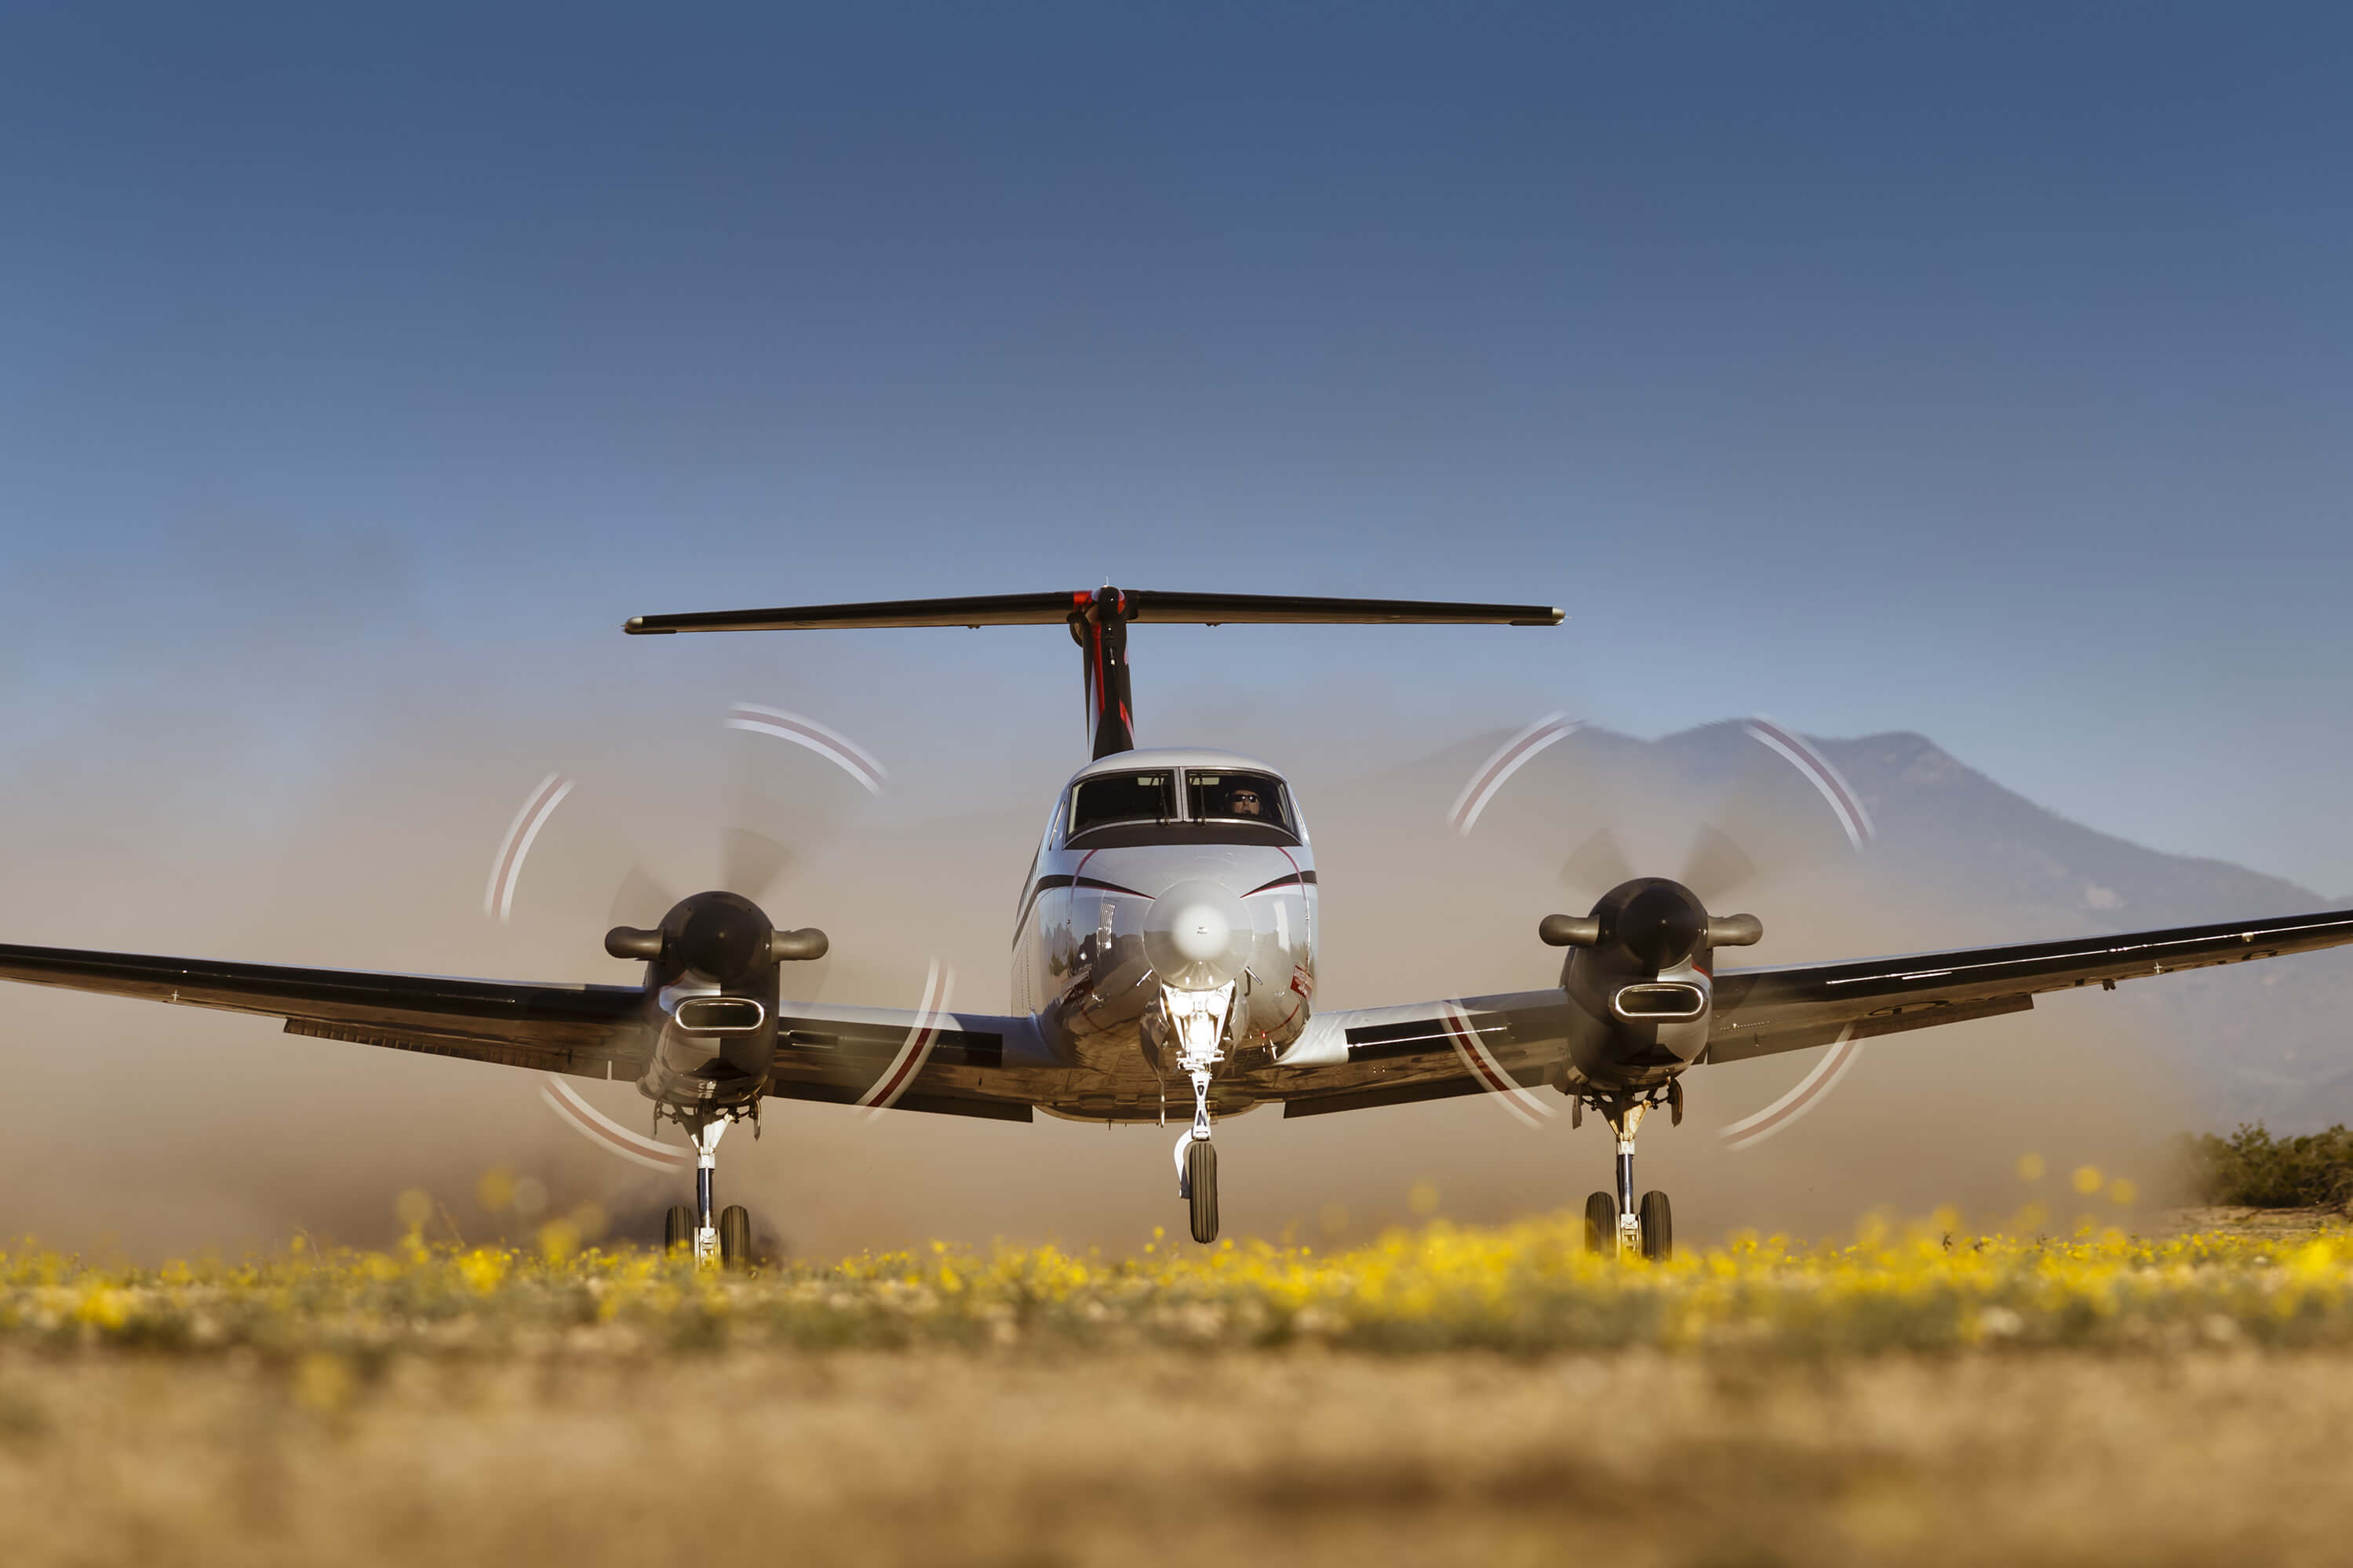 Beechcraft introduces special mission enhancements for the King Air 350 platform